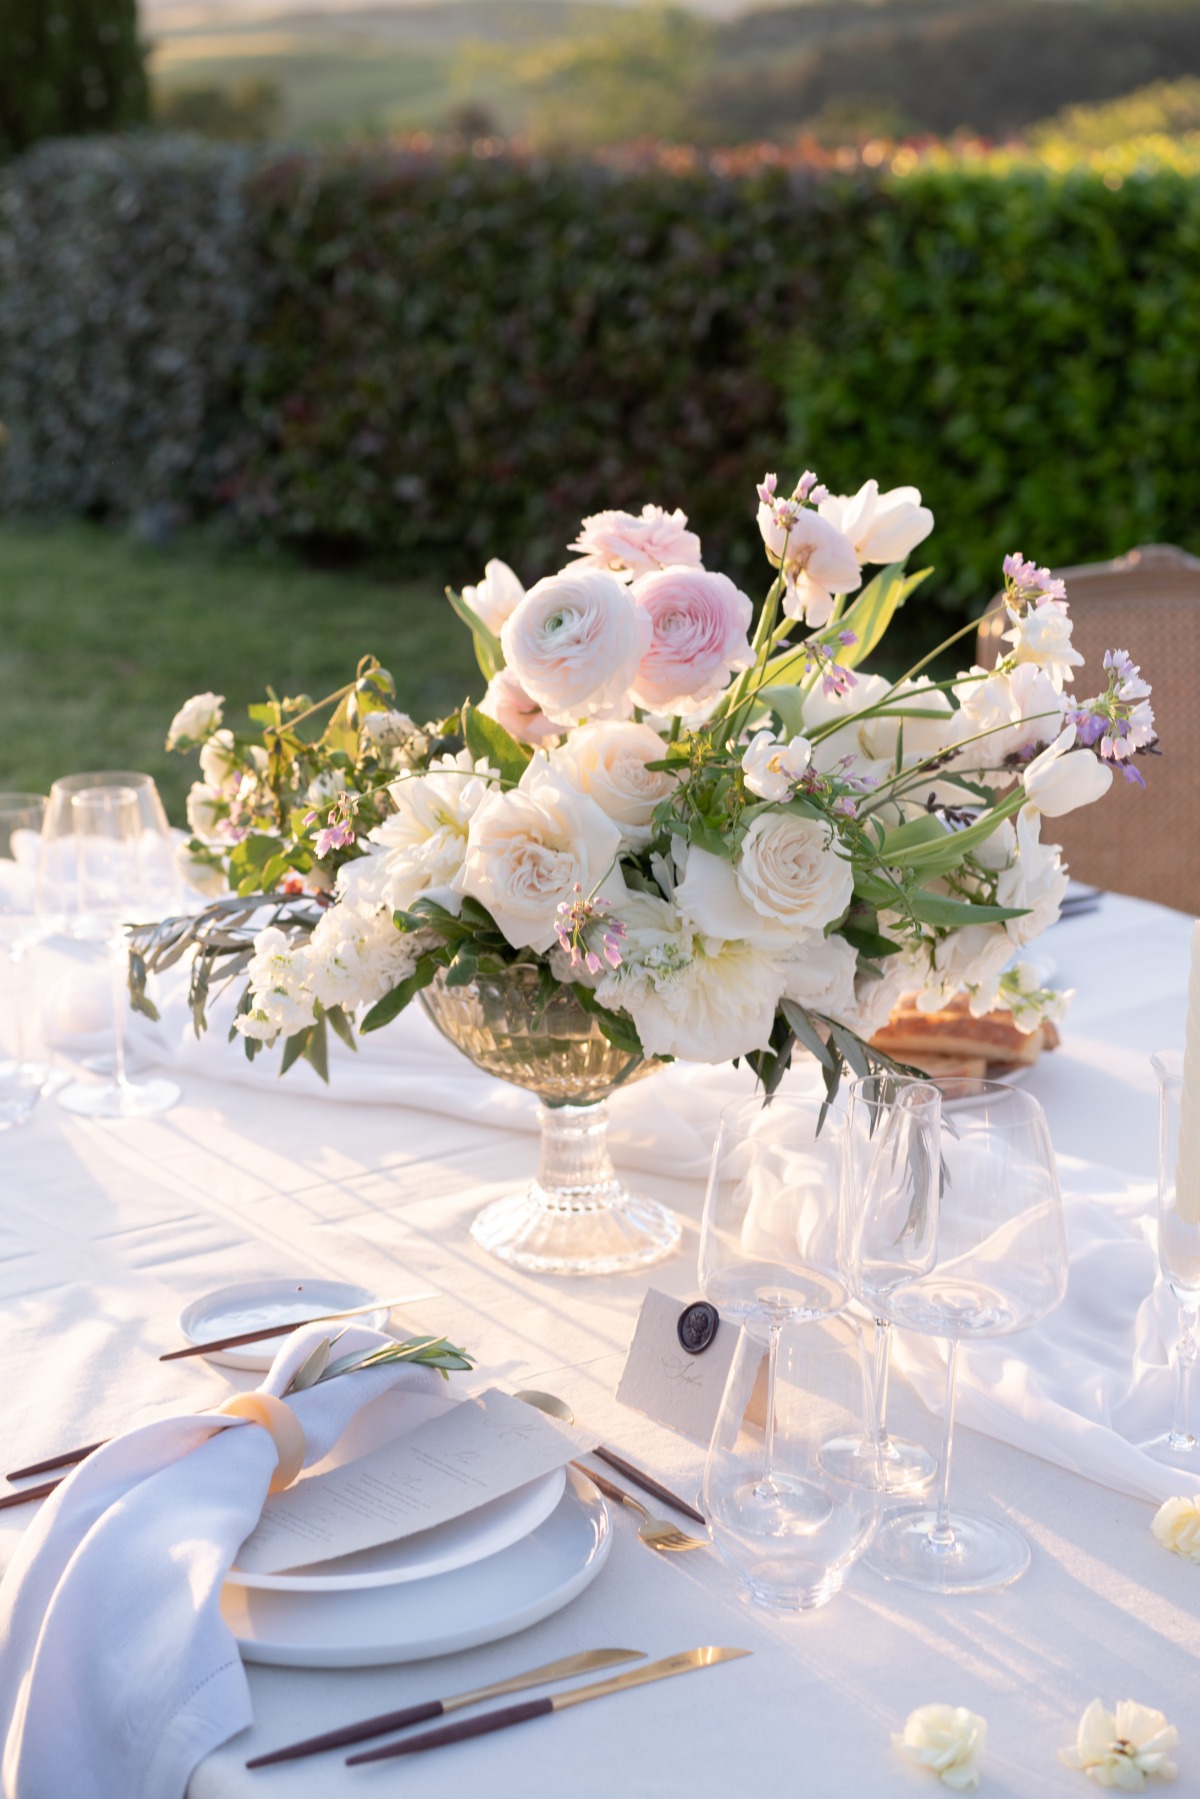 Lovely white and blush centerpiece for elegant reception 